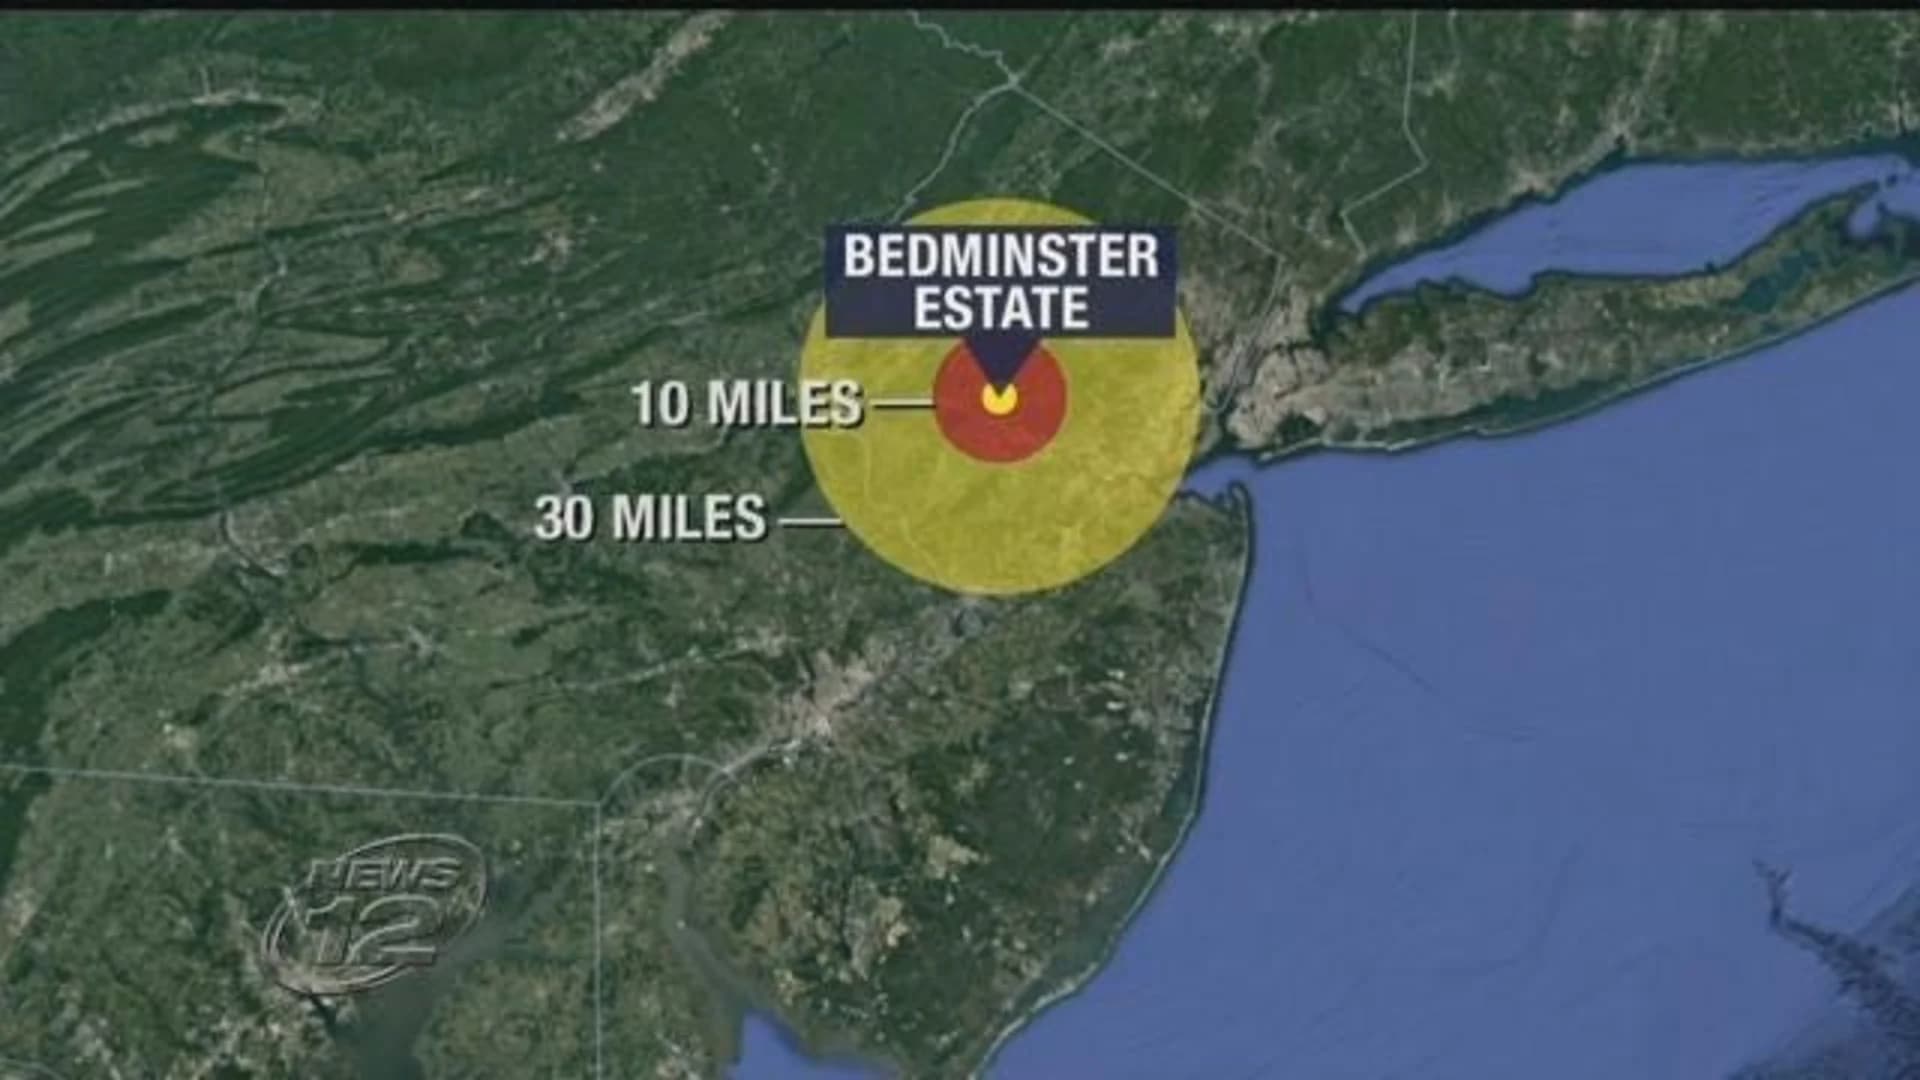 President Trump's Bedminster vacation to impact area airports